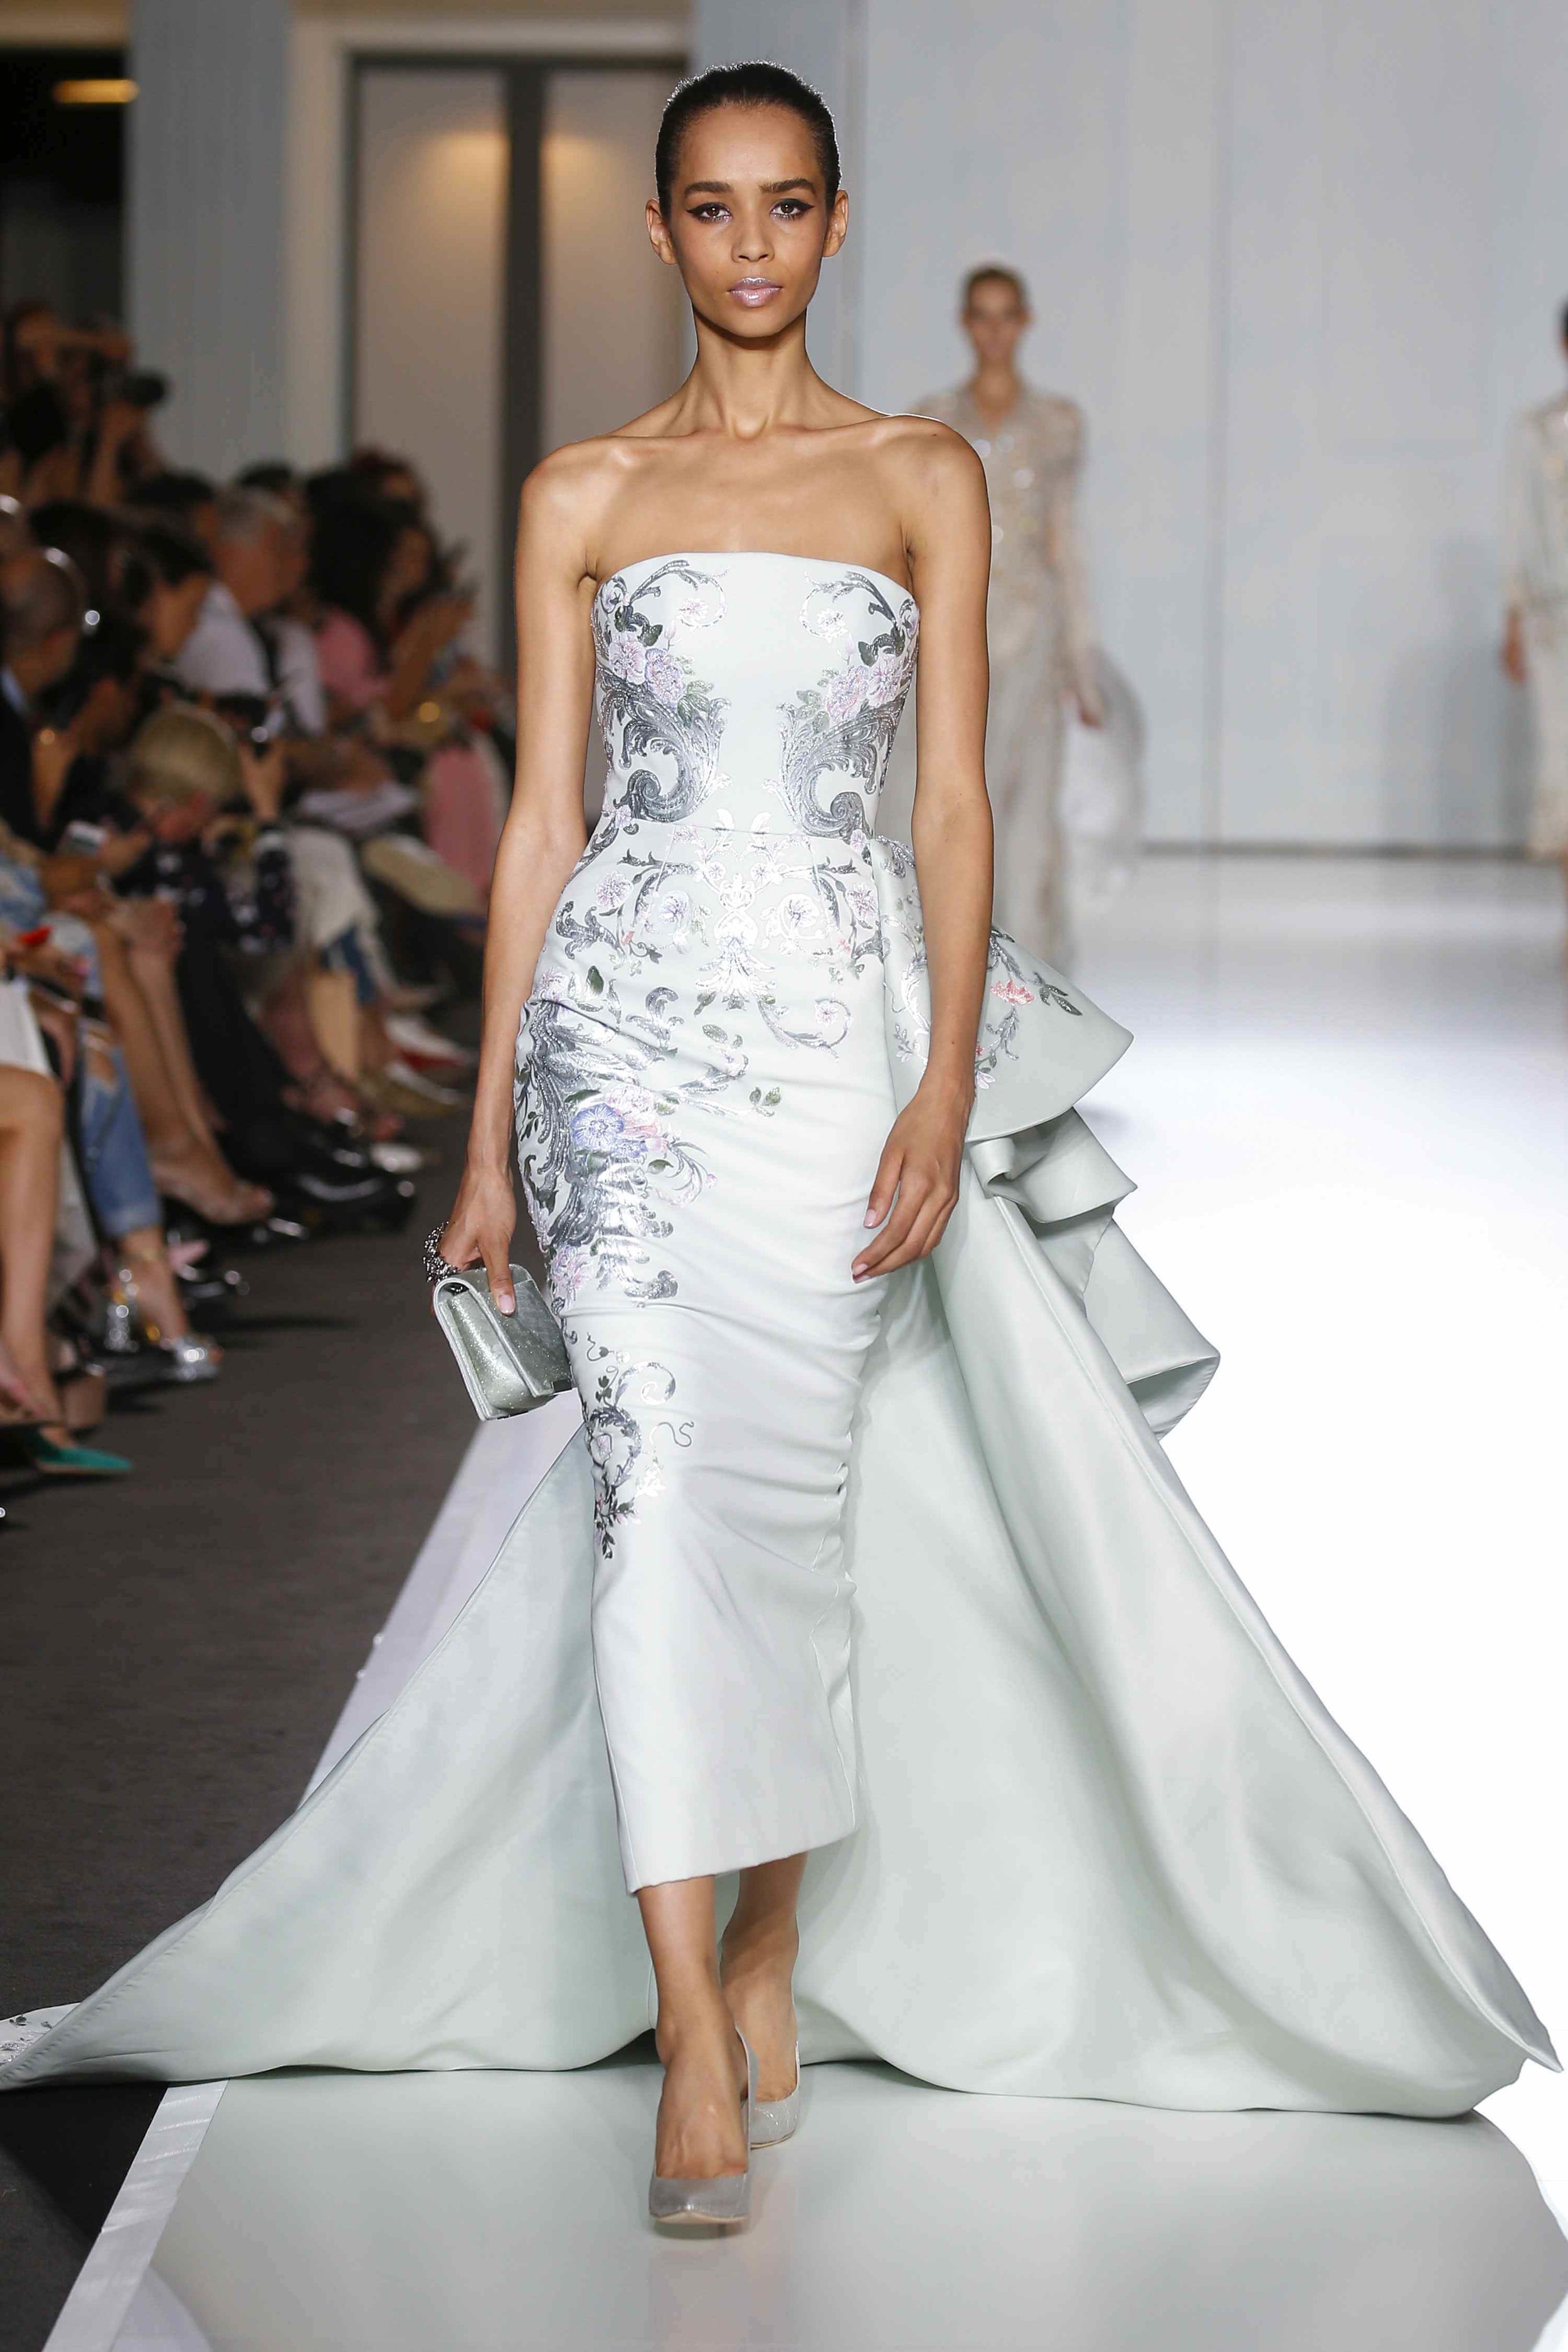 Ralph and Russo bring avatars to couture